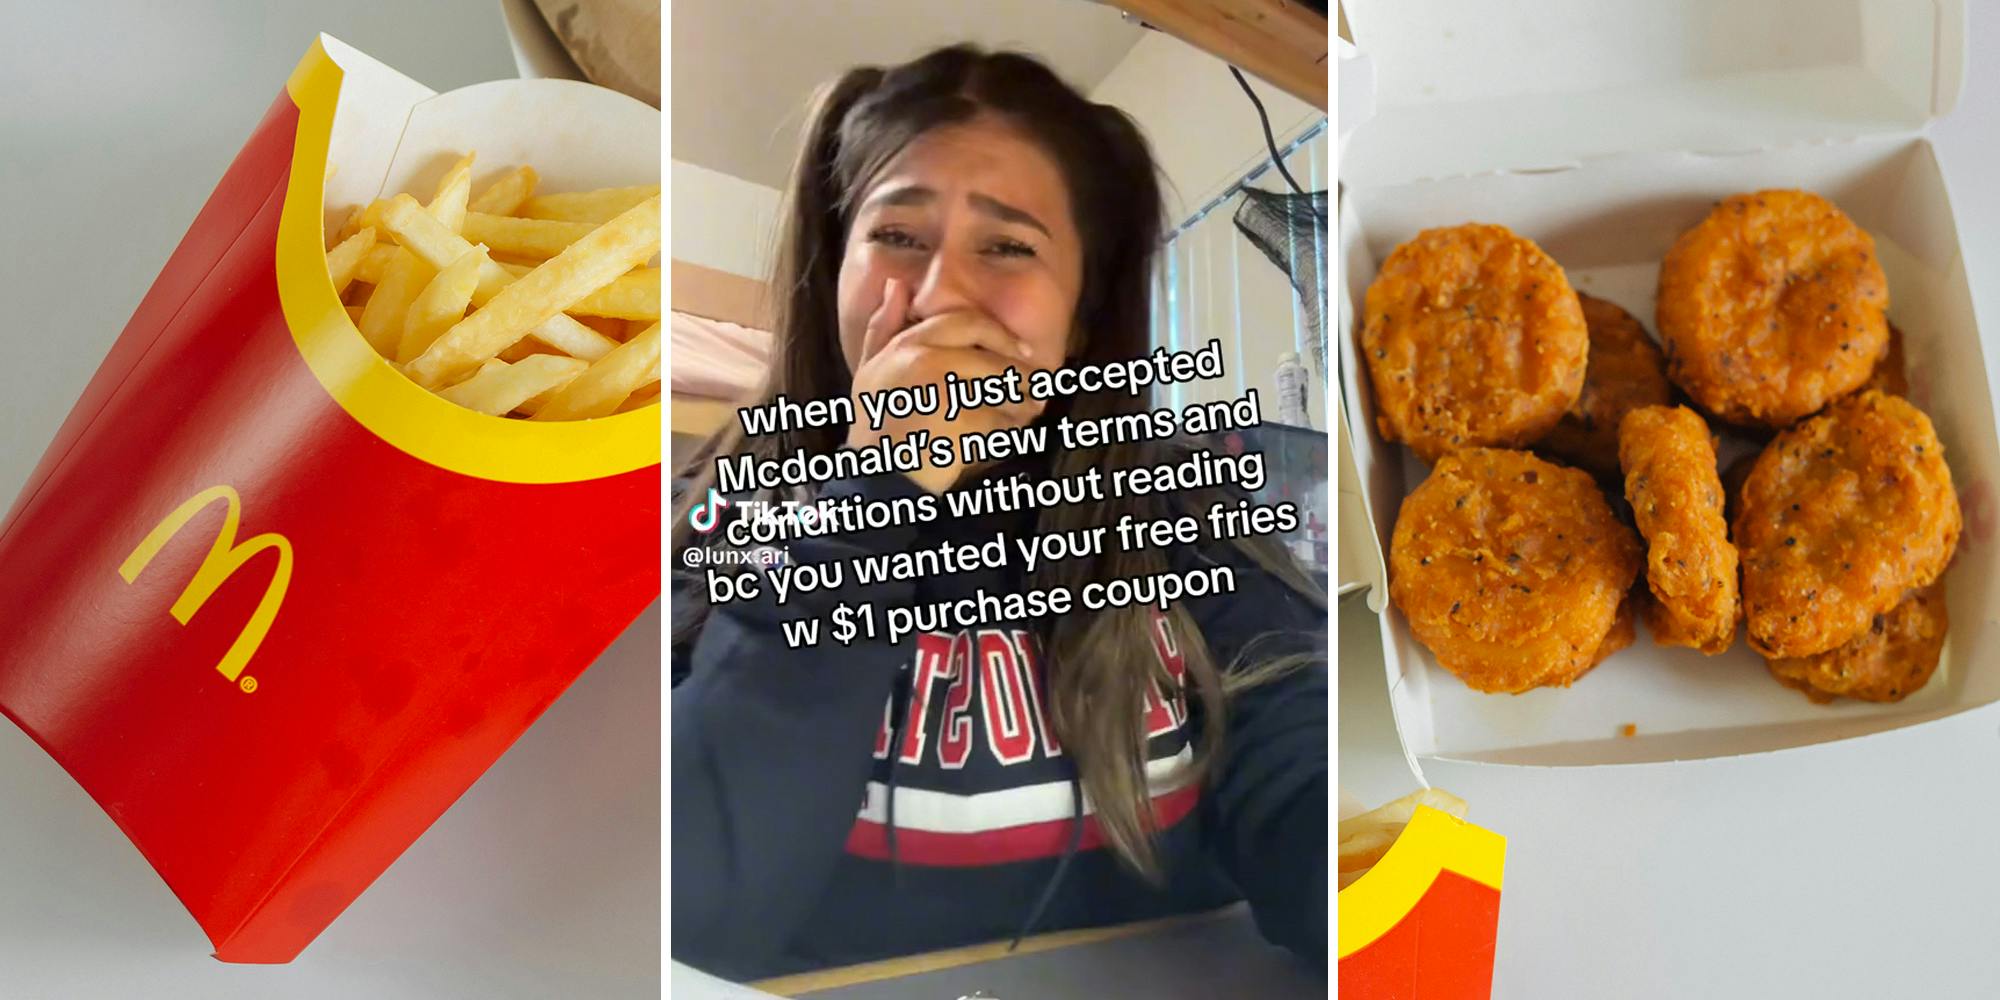 McDonald's fries (l) Young woman crying with caption "when you just accepted McDonald's new terms and conditions without reading bc you wanted your free fries w $1 purchase coupon" (c) McDonald's chicken nuggets (r)